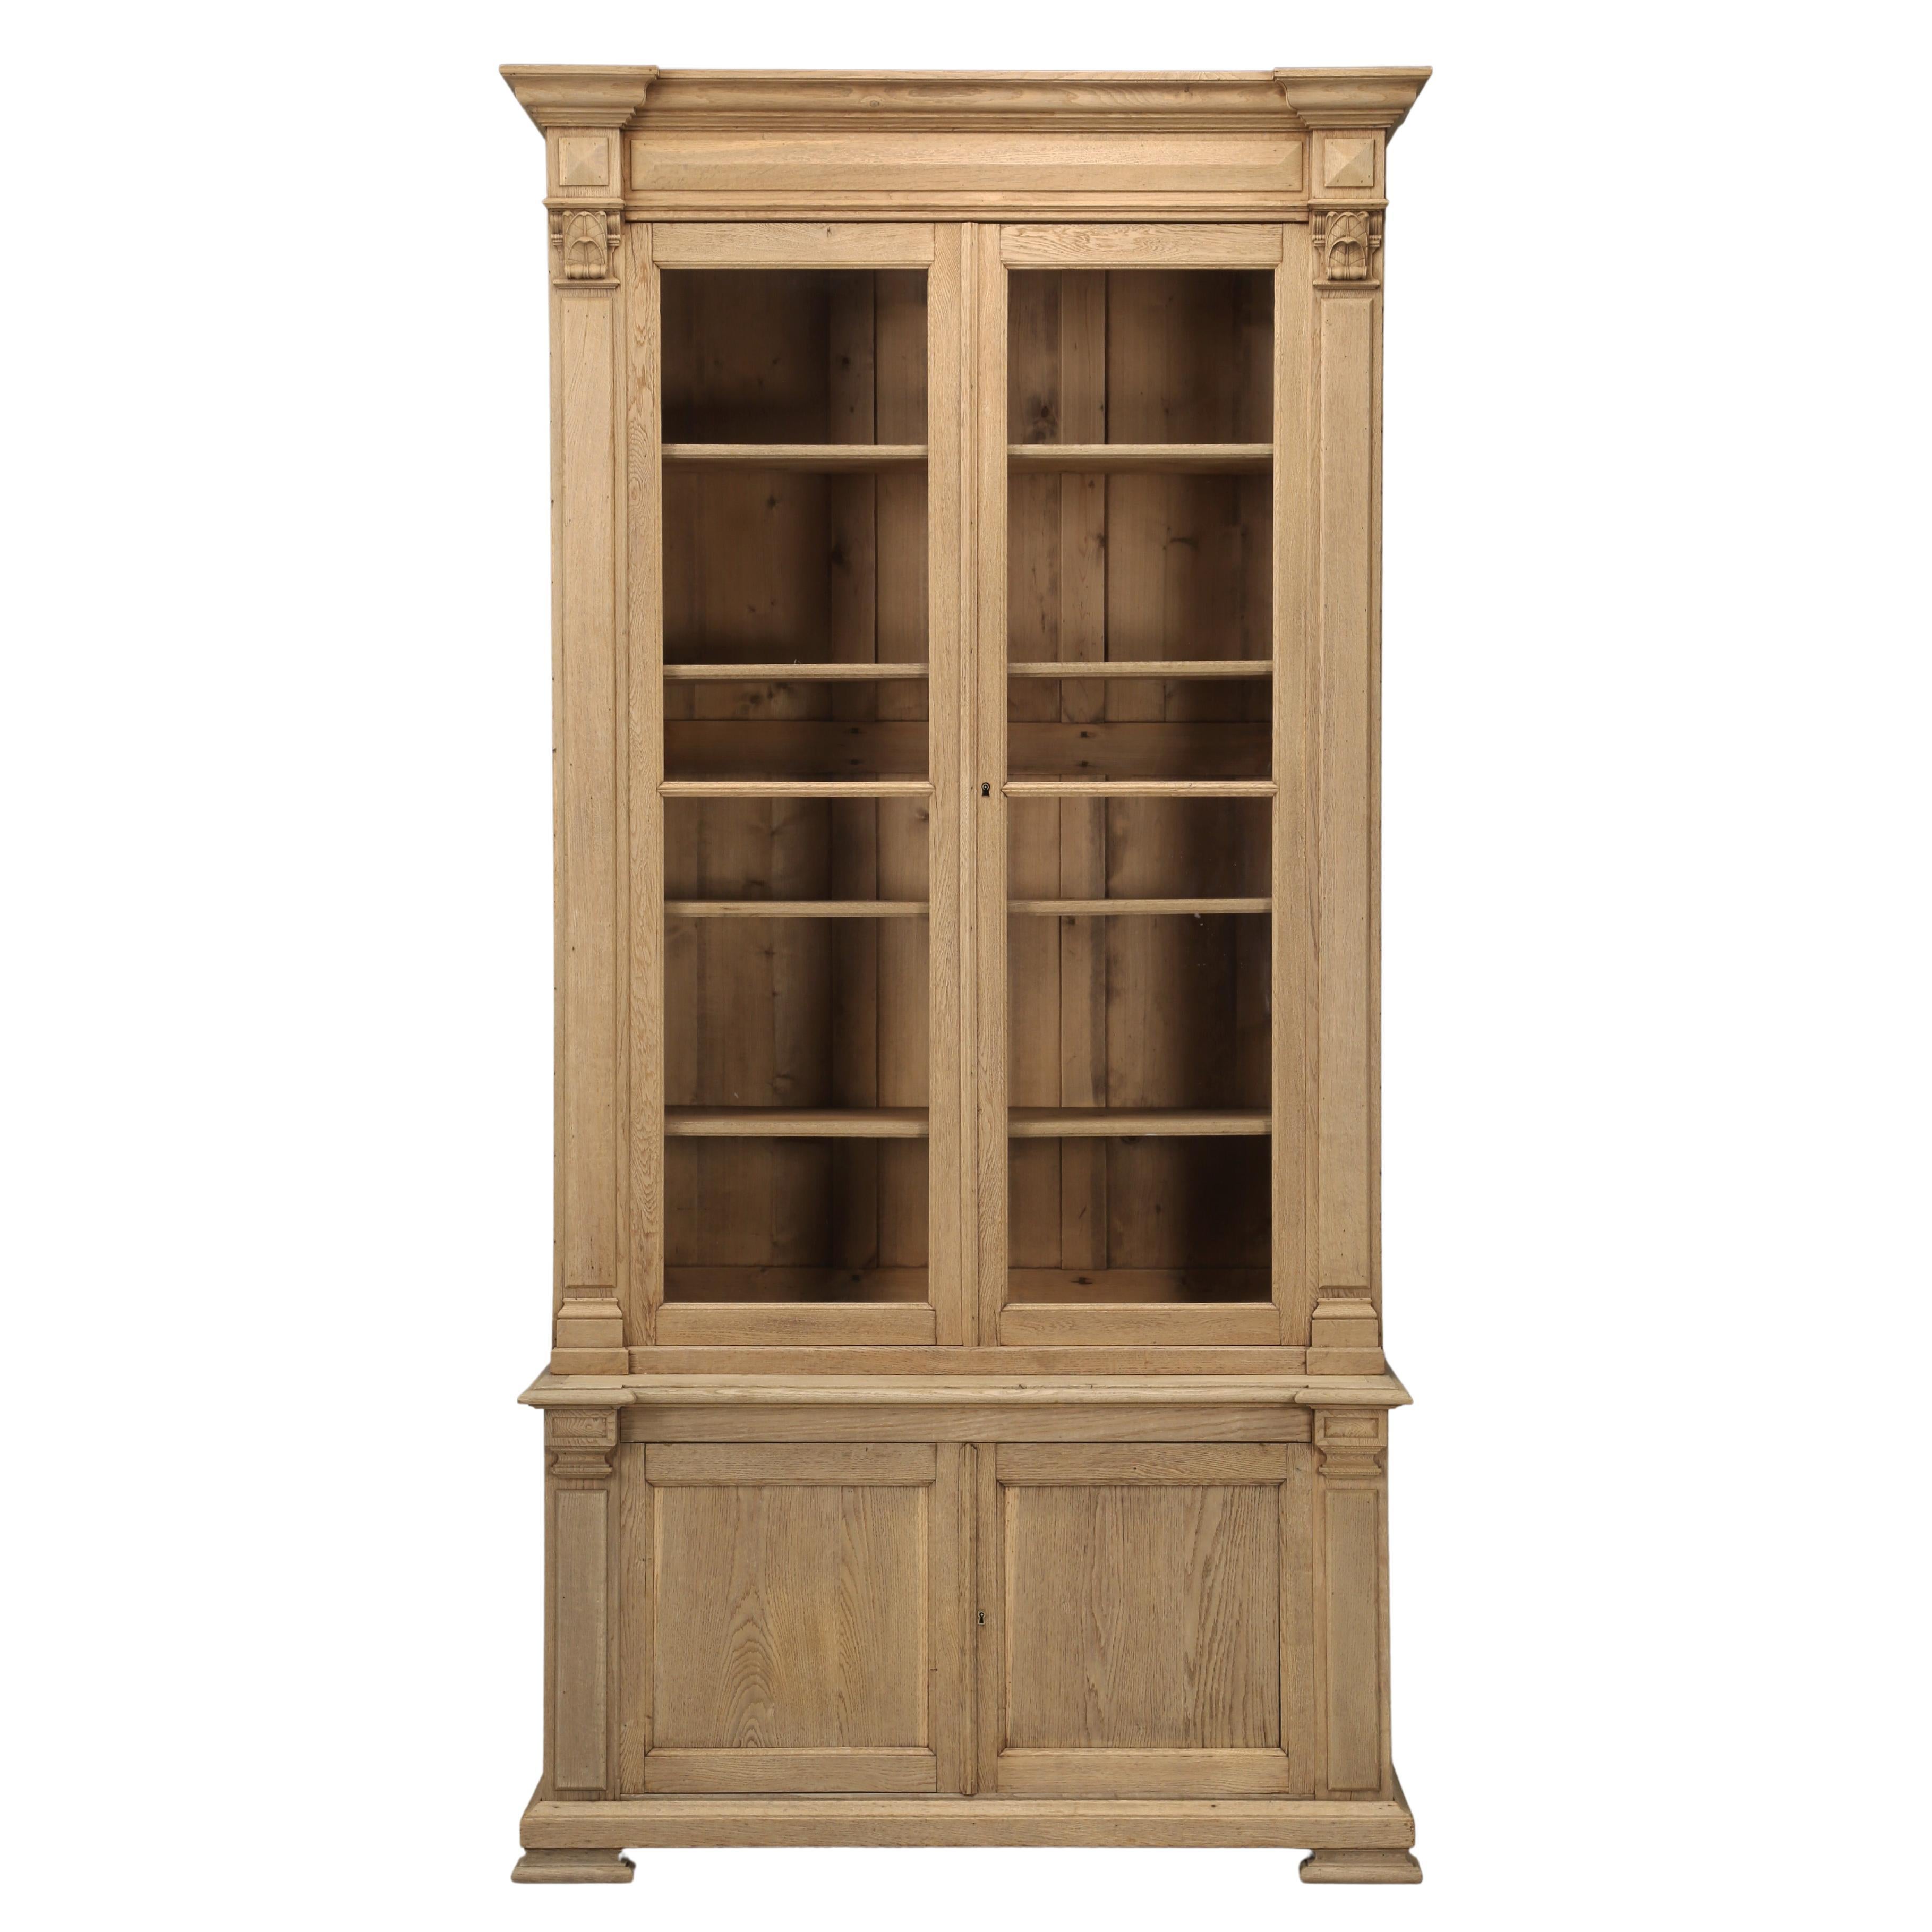 Antique French Oak Bookcase with 2-Original Wavy Glass Doors, Unrestored